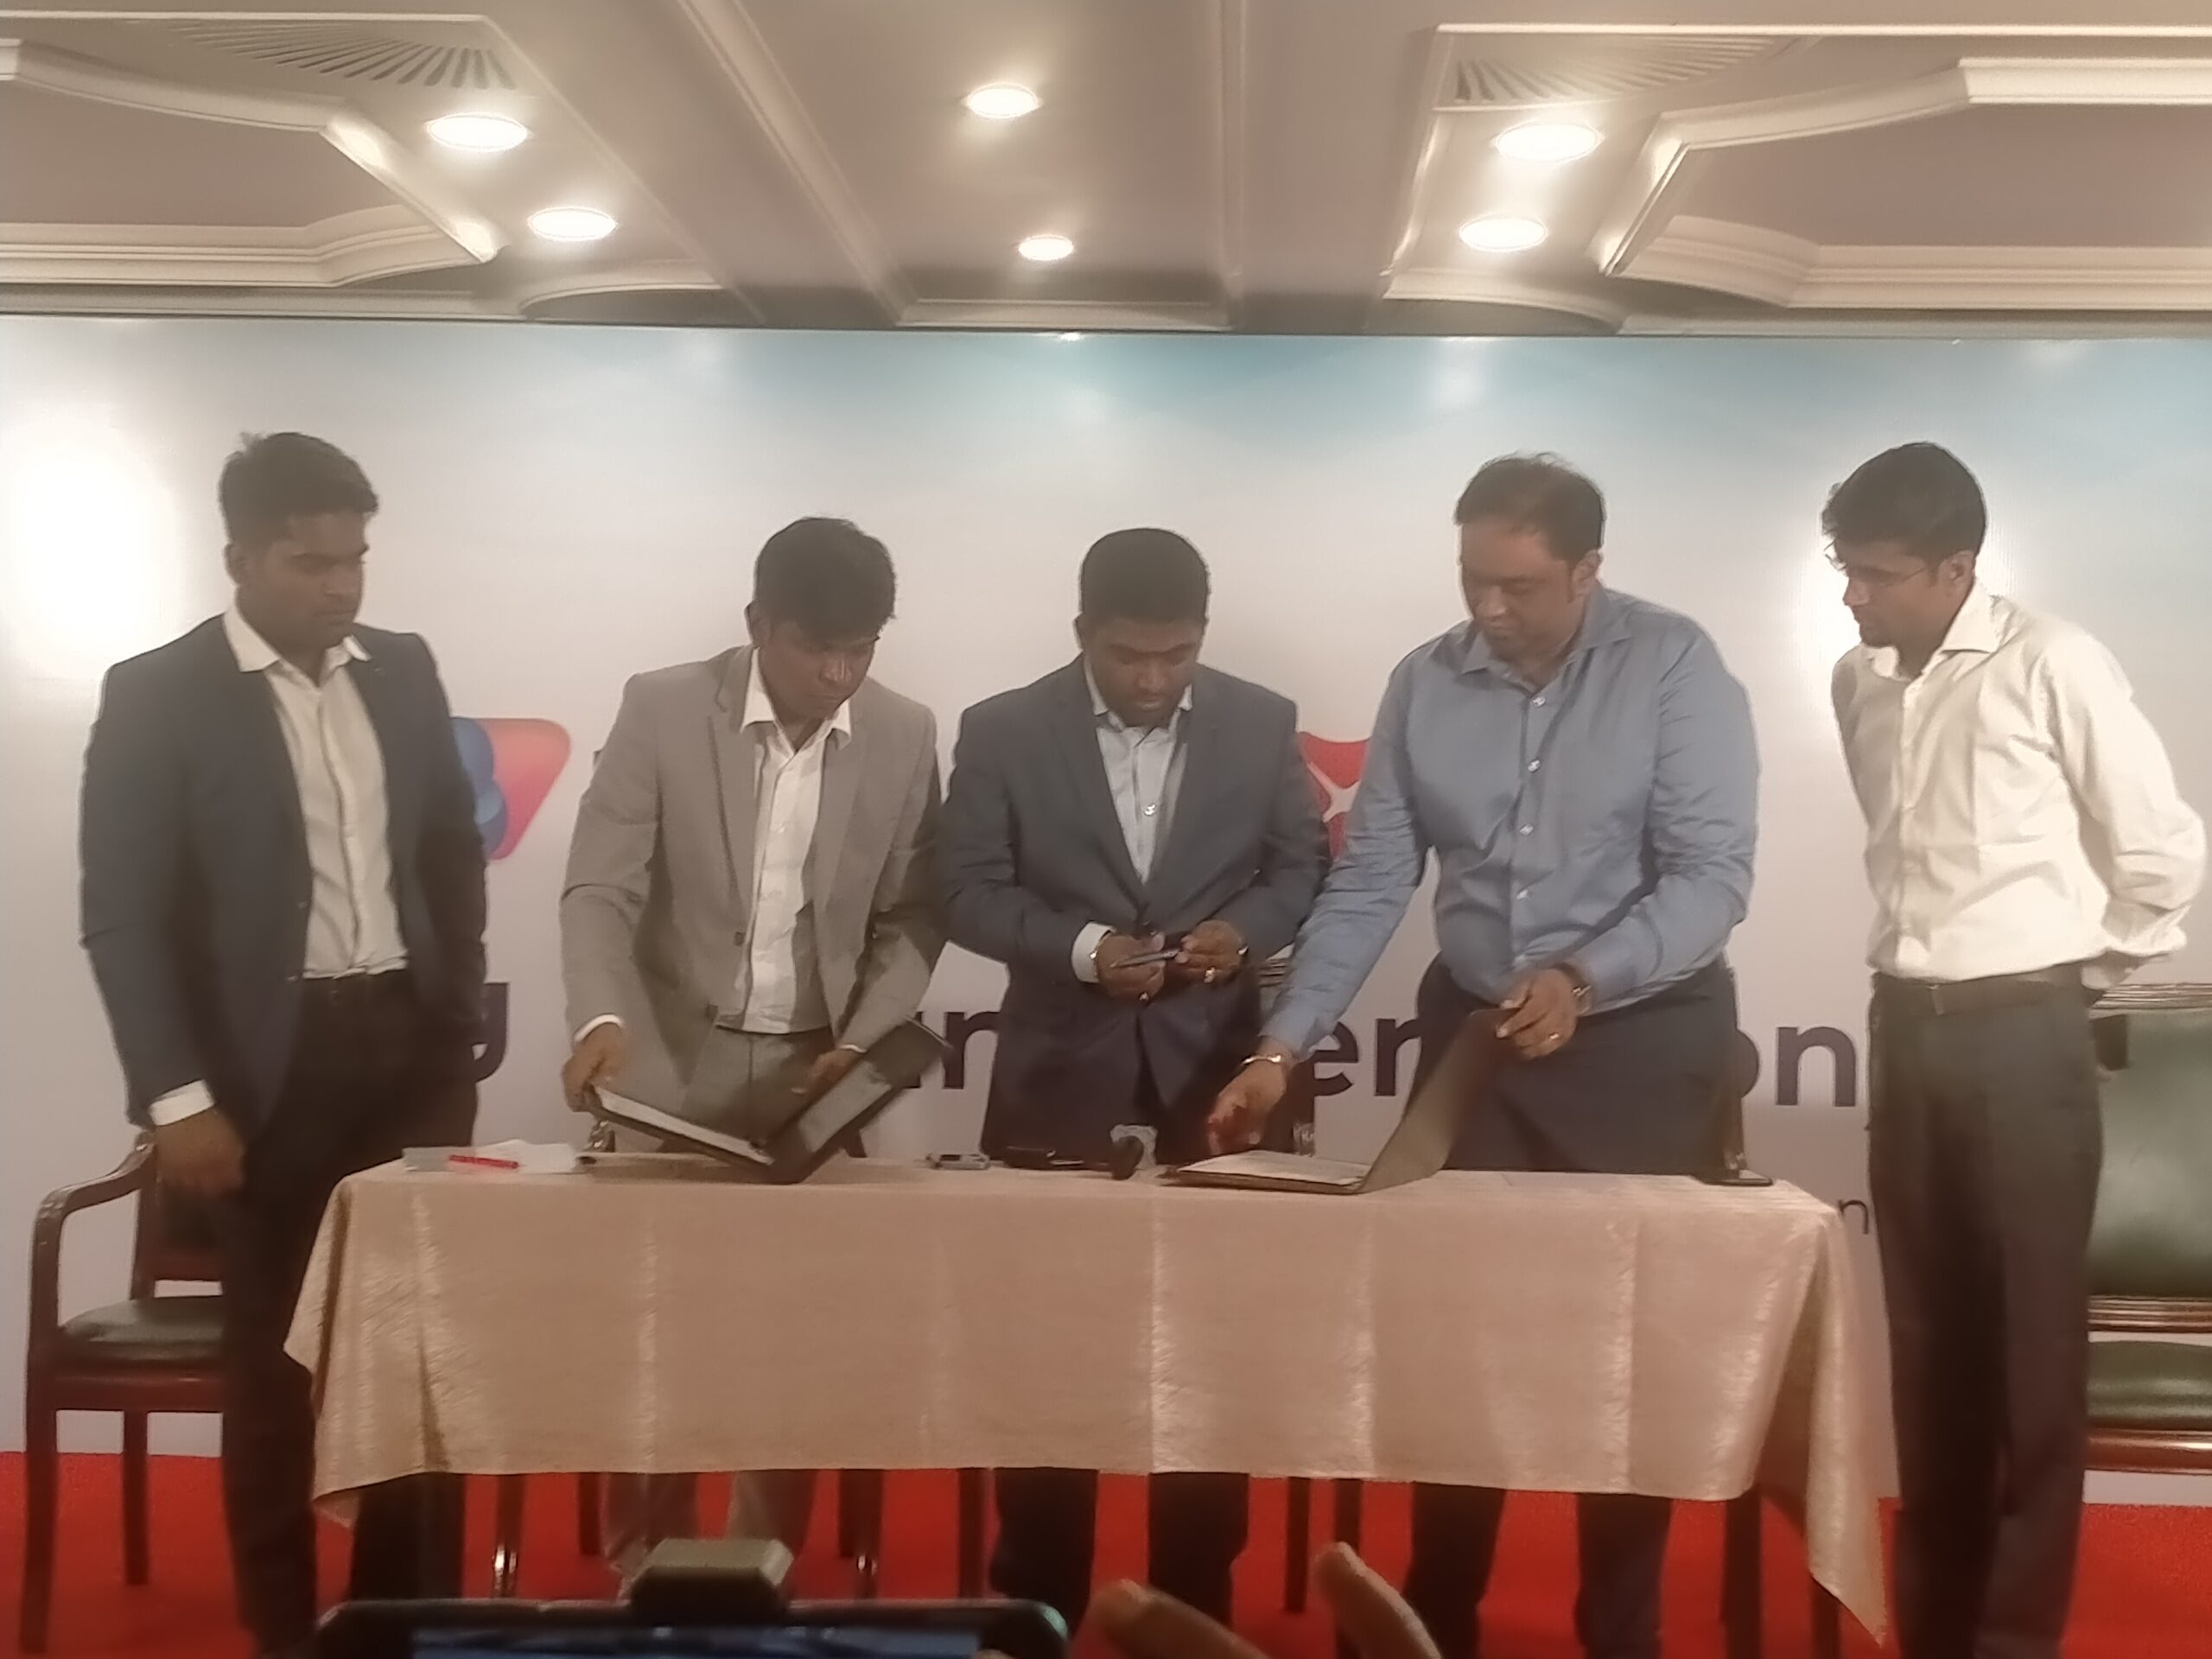 The Chennai based Billionaire Venture Incubation and DBS Bank are signing an MoU today to facilitate investment